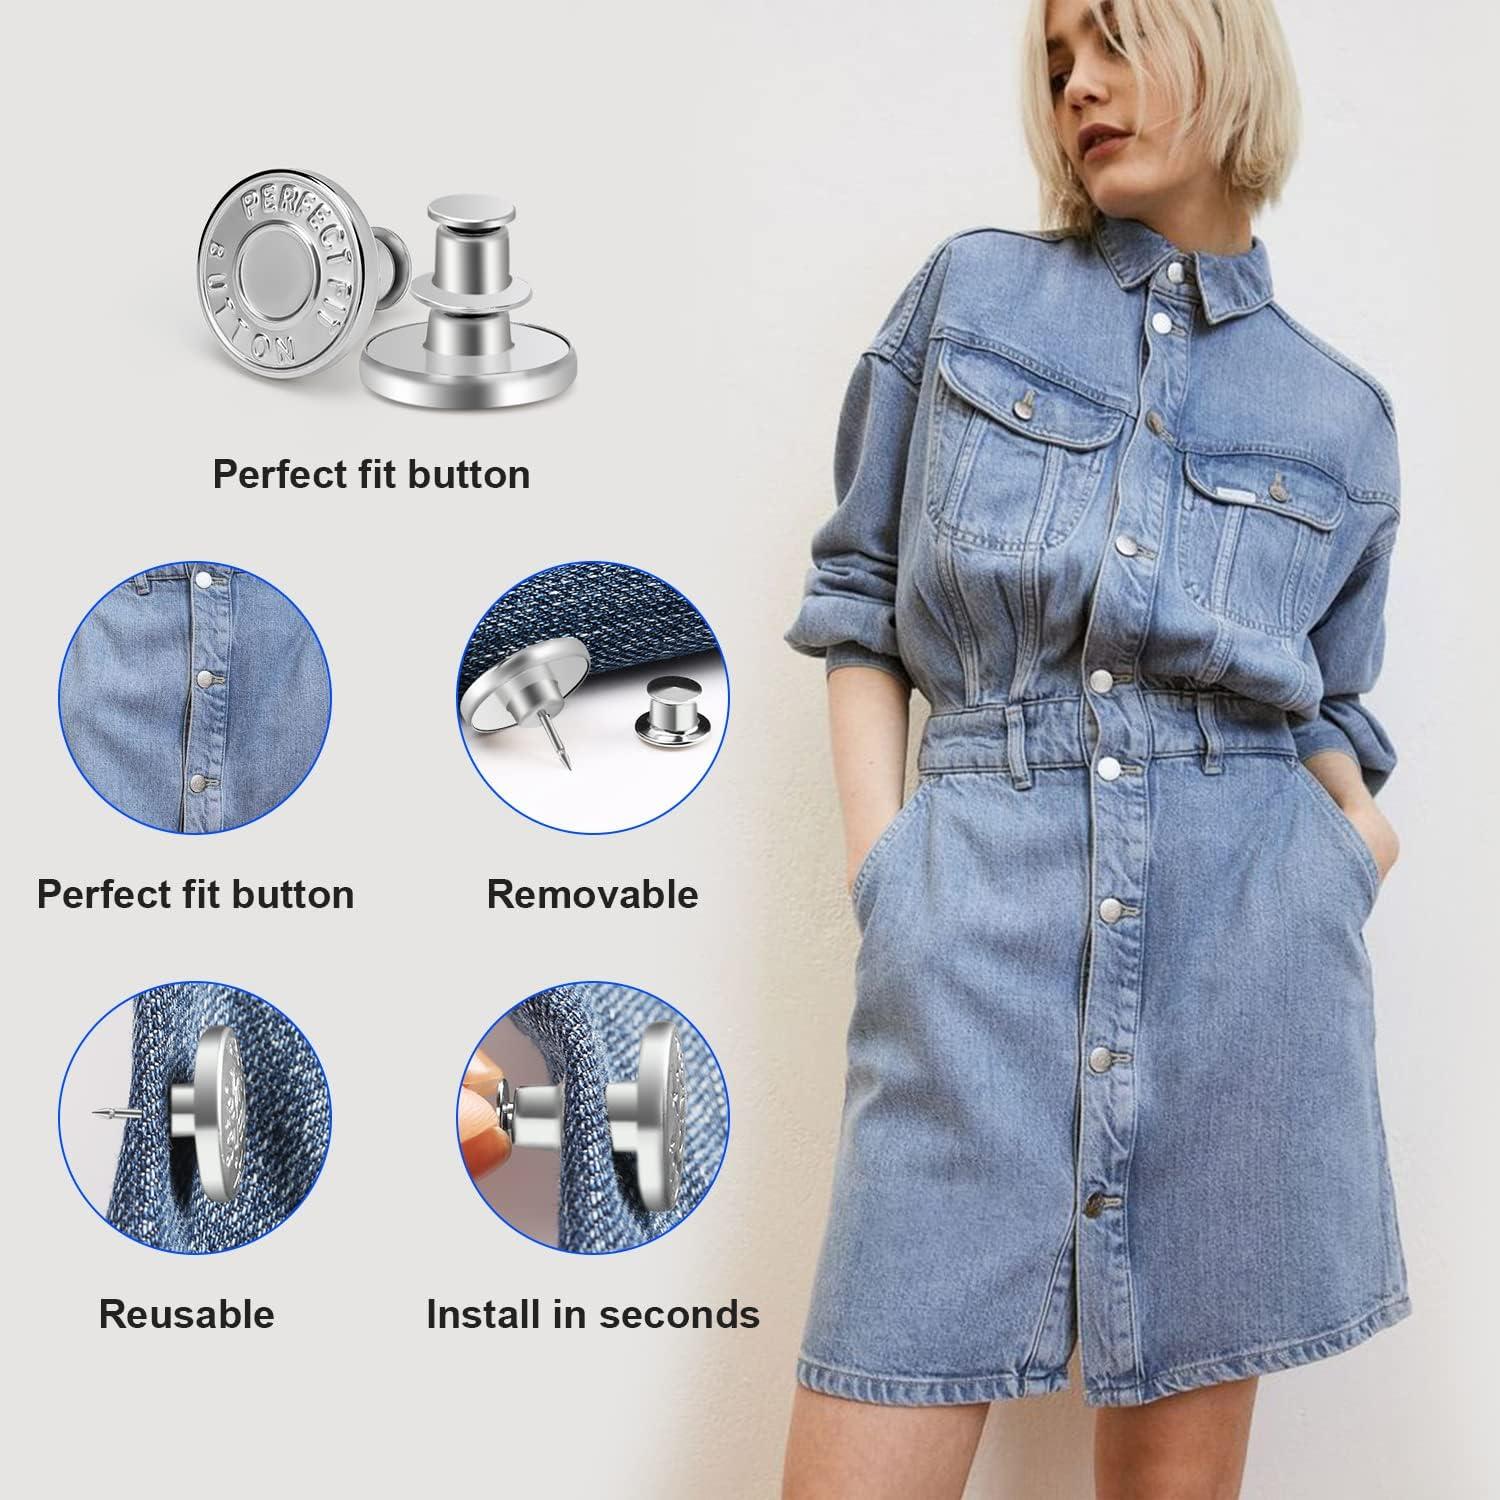 12 Sets Button Pins for Jeans Pants, Adjustable Reusable Jean Buttons Pins  Instant Reduce Loose Jeans, No Sew and No Tools Metal Pants Button  Replacement, Clips Jean Button Tightener